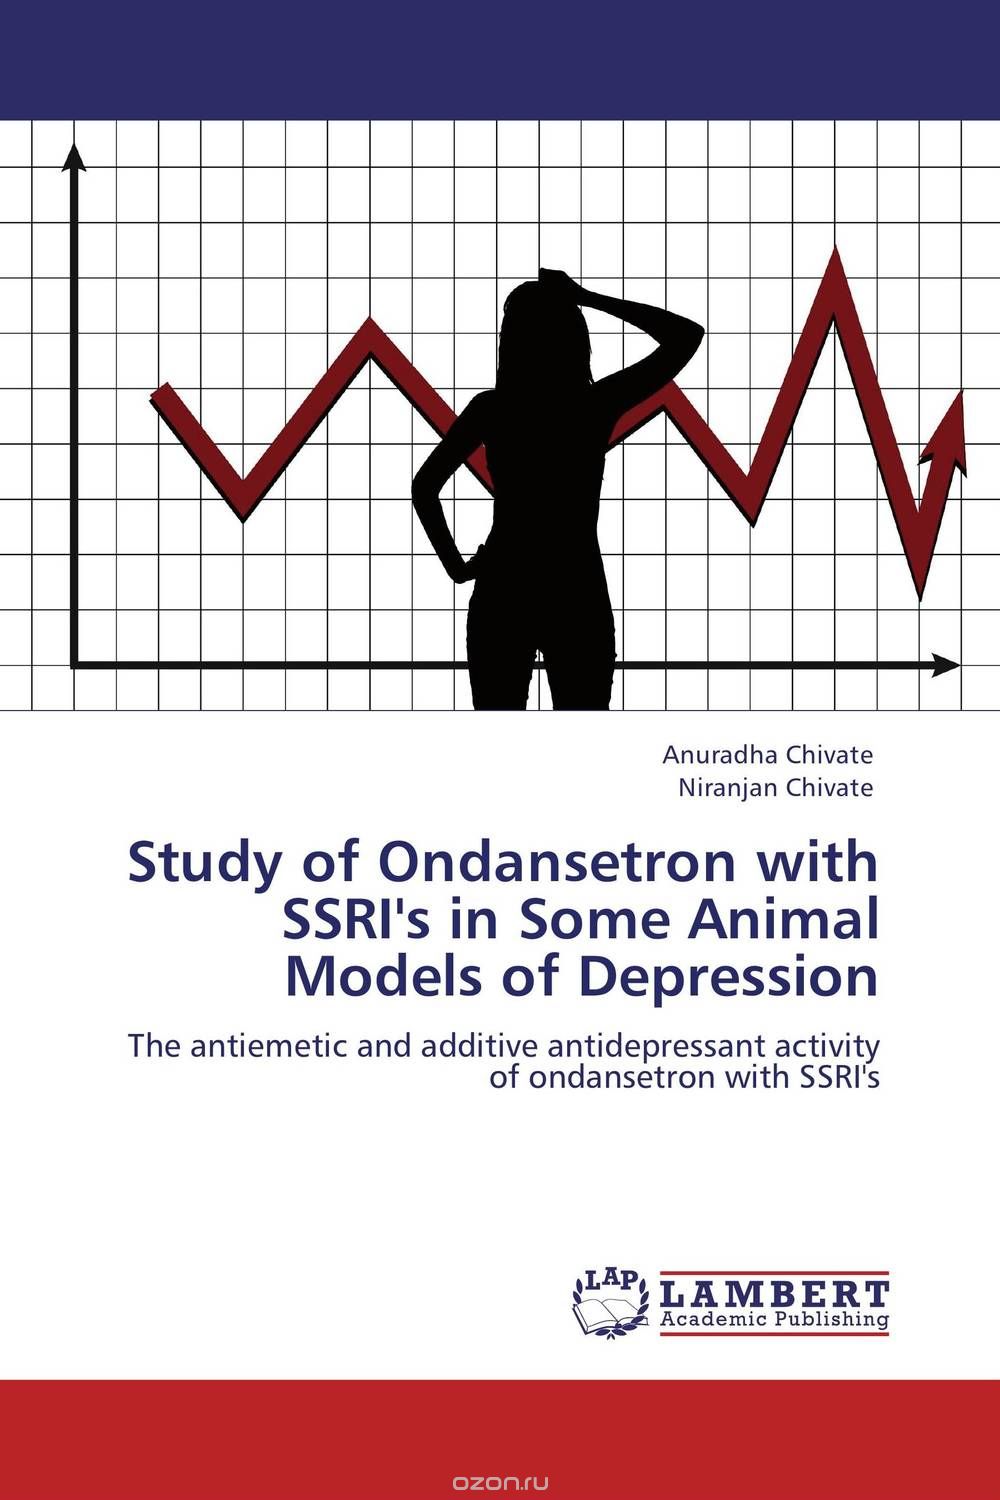 Study of Ondansetron with SSRI's in Some Animal Models of Depression